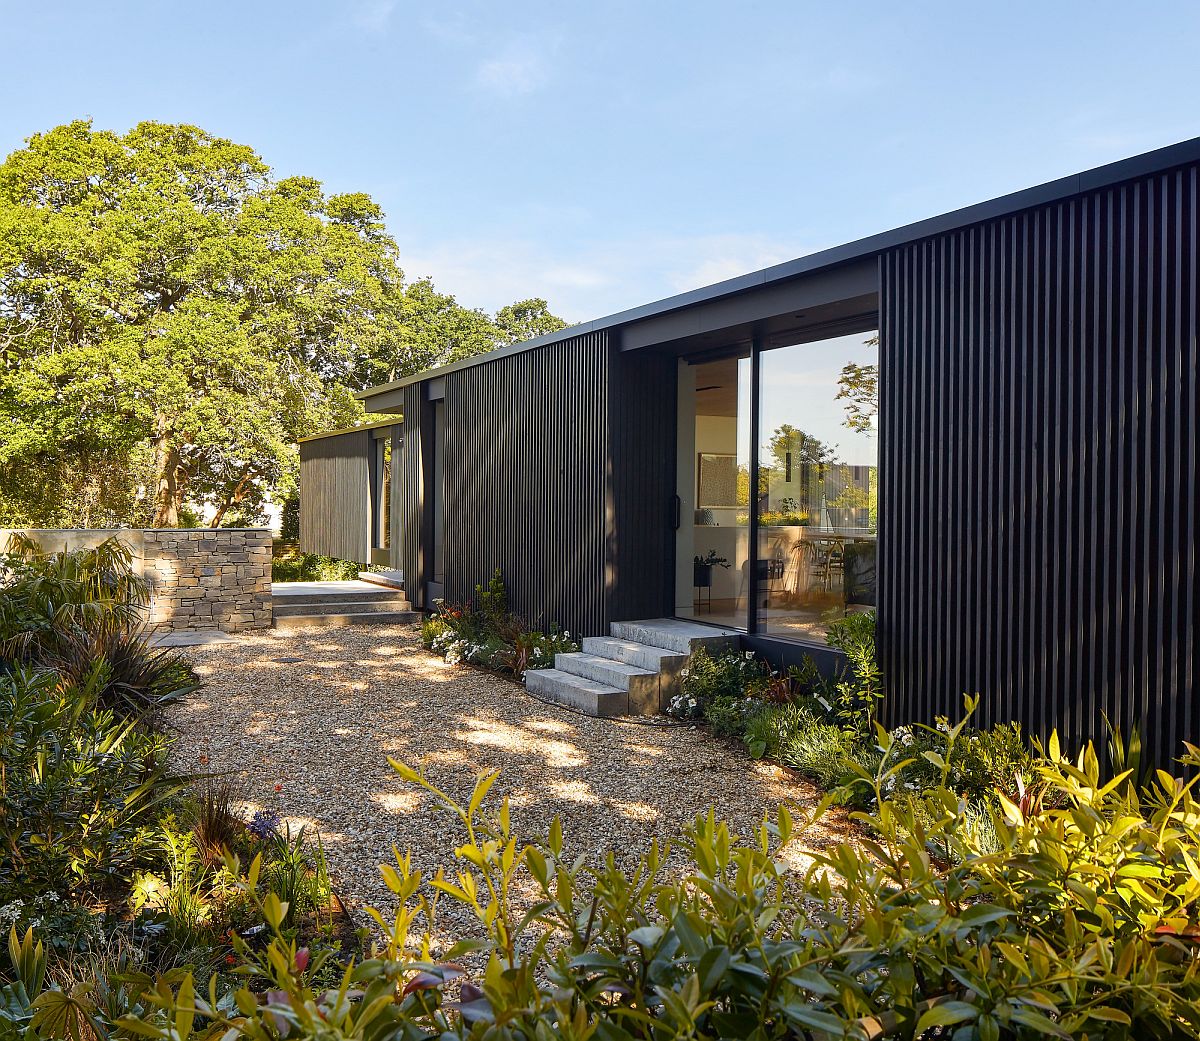 Dashing dark exterior of the house allows it to blend in with the landscape after sunset